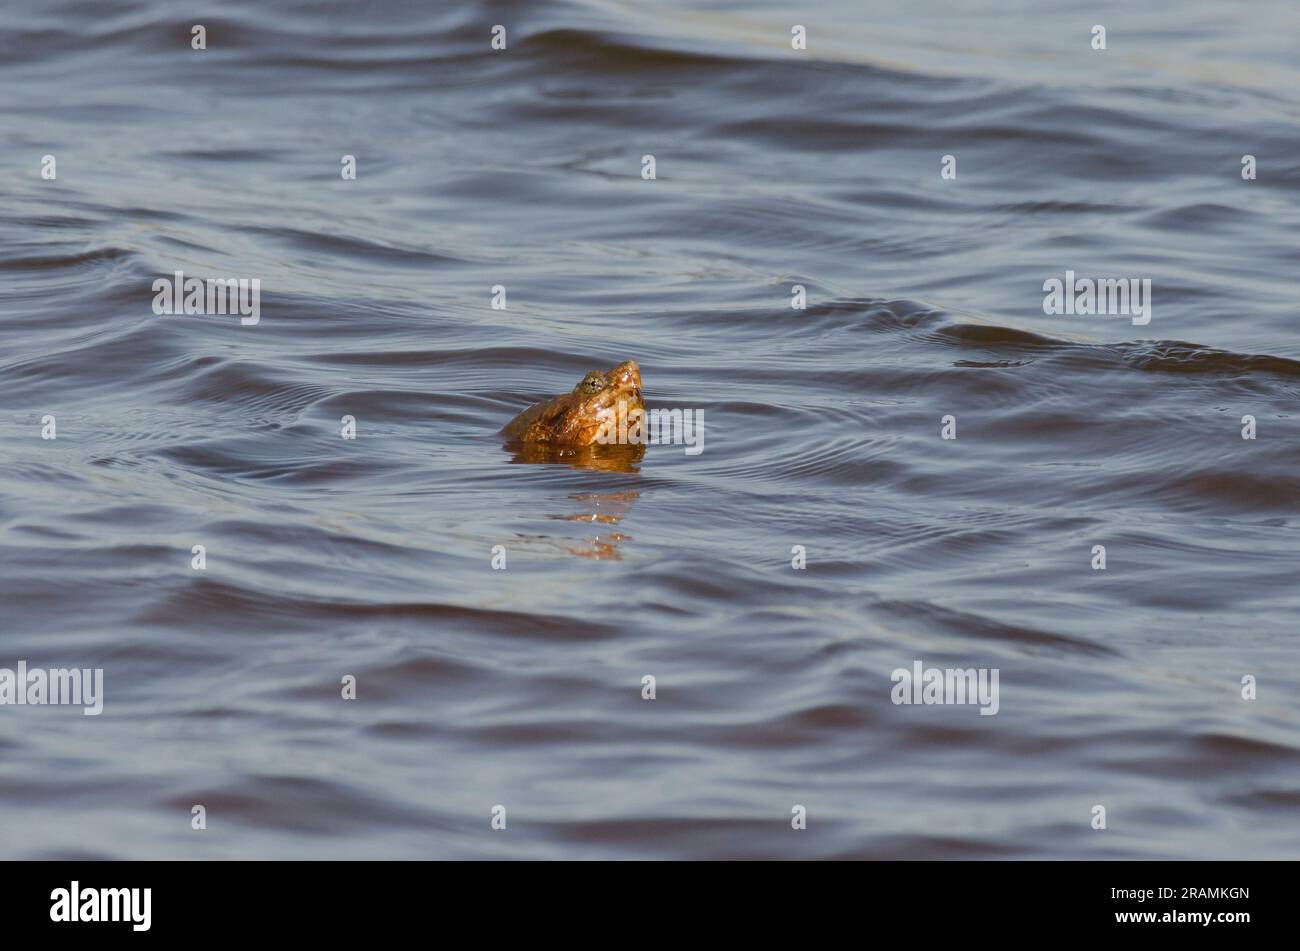 Common Snapping Turtle, Chelydra serpentina, head above water's surface Stock Photo